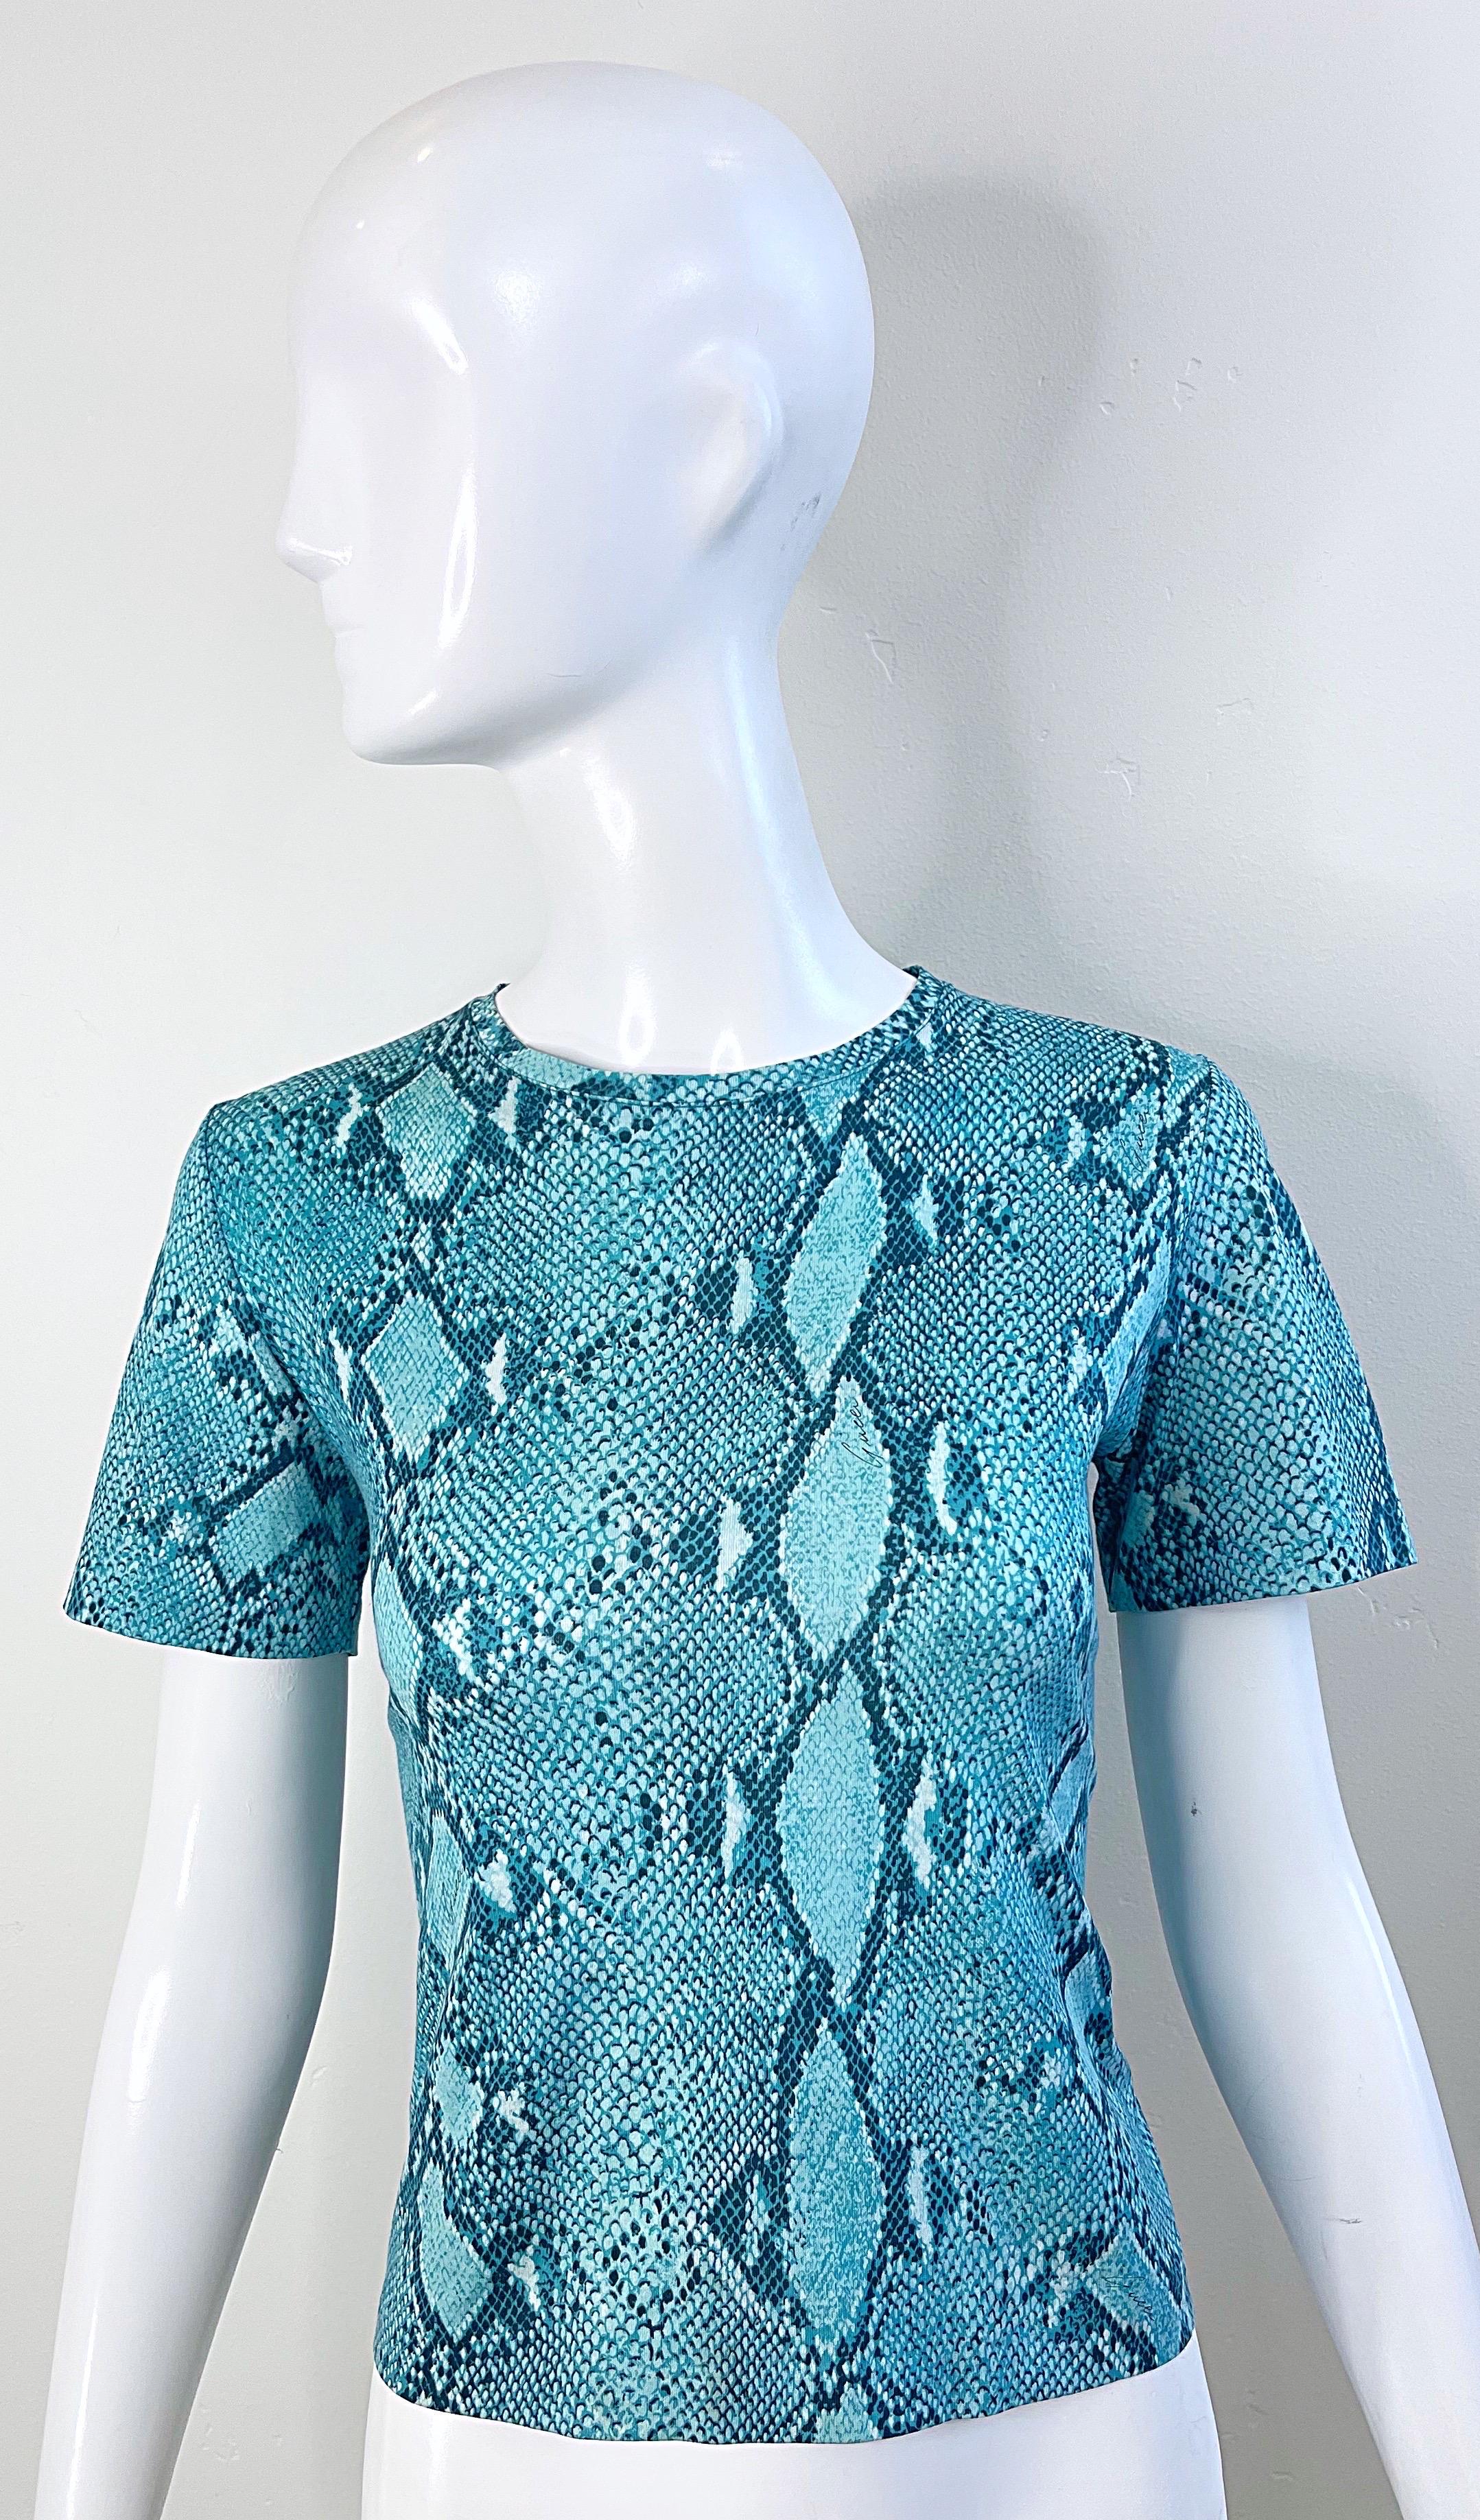 Gucci by Tom Ford Spring 2000 Turquoise Blue Snake Print Vintage Tee Shirt Y2K For Sale 11